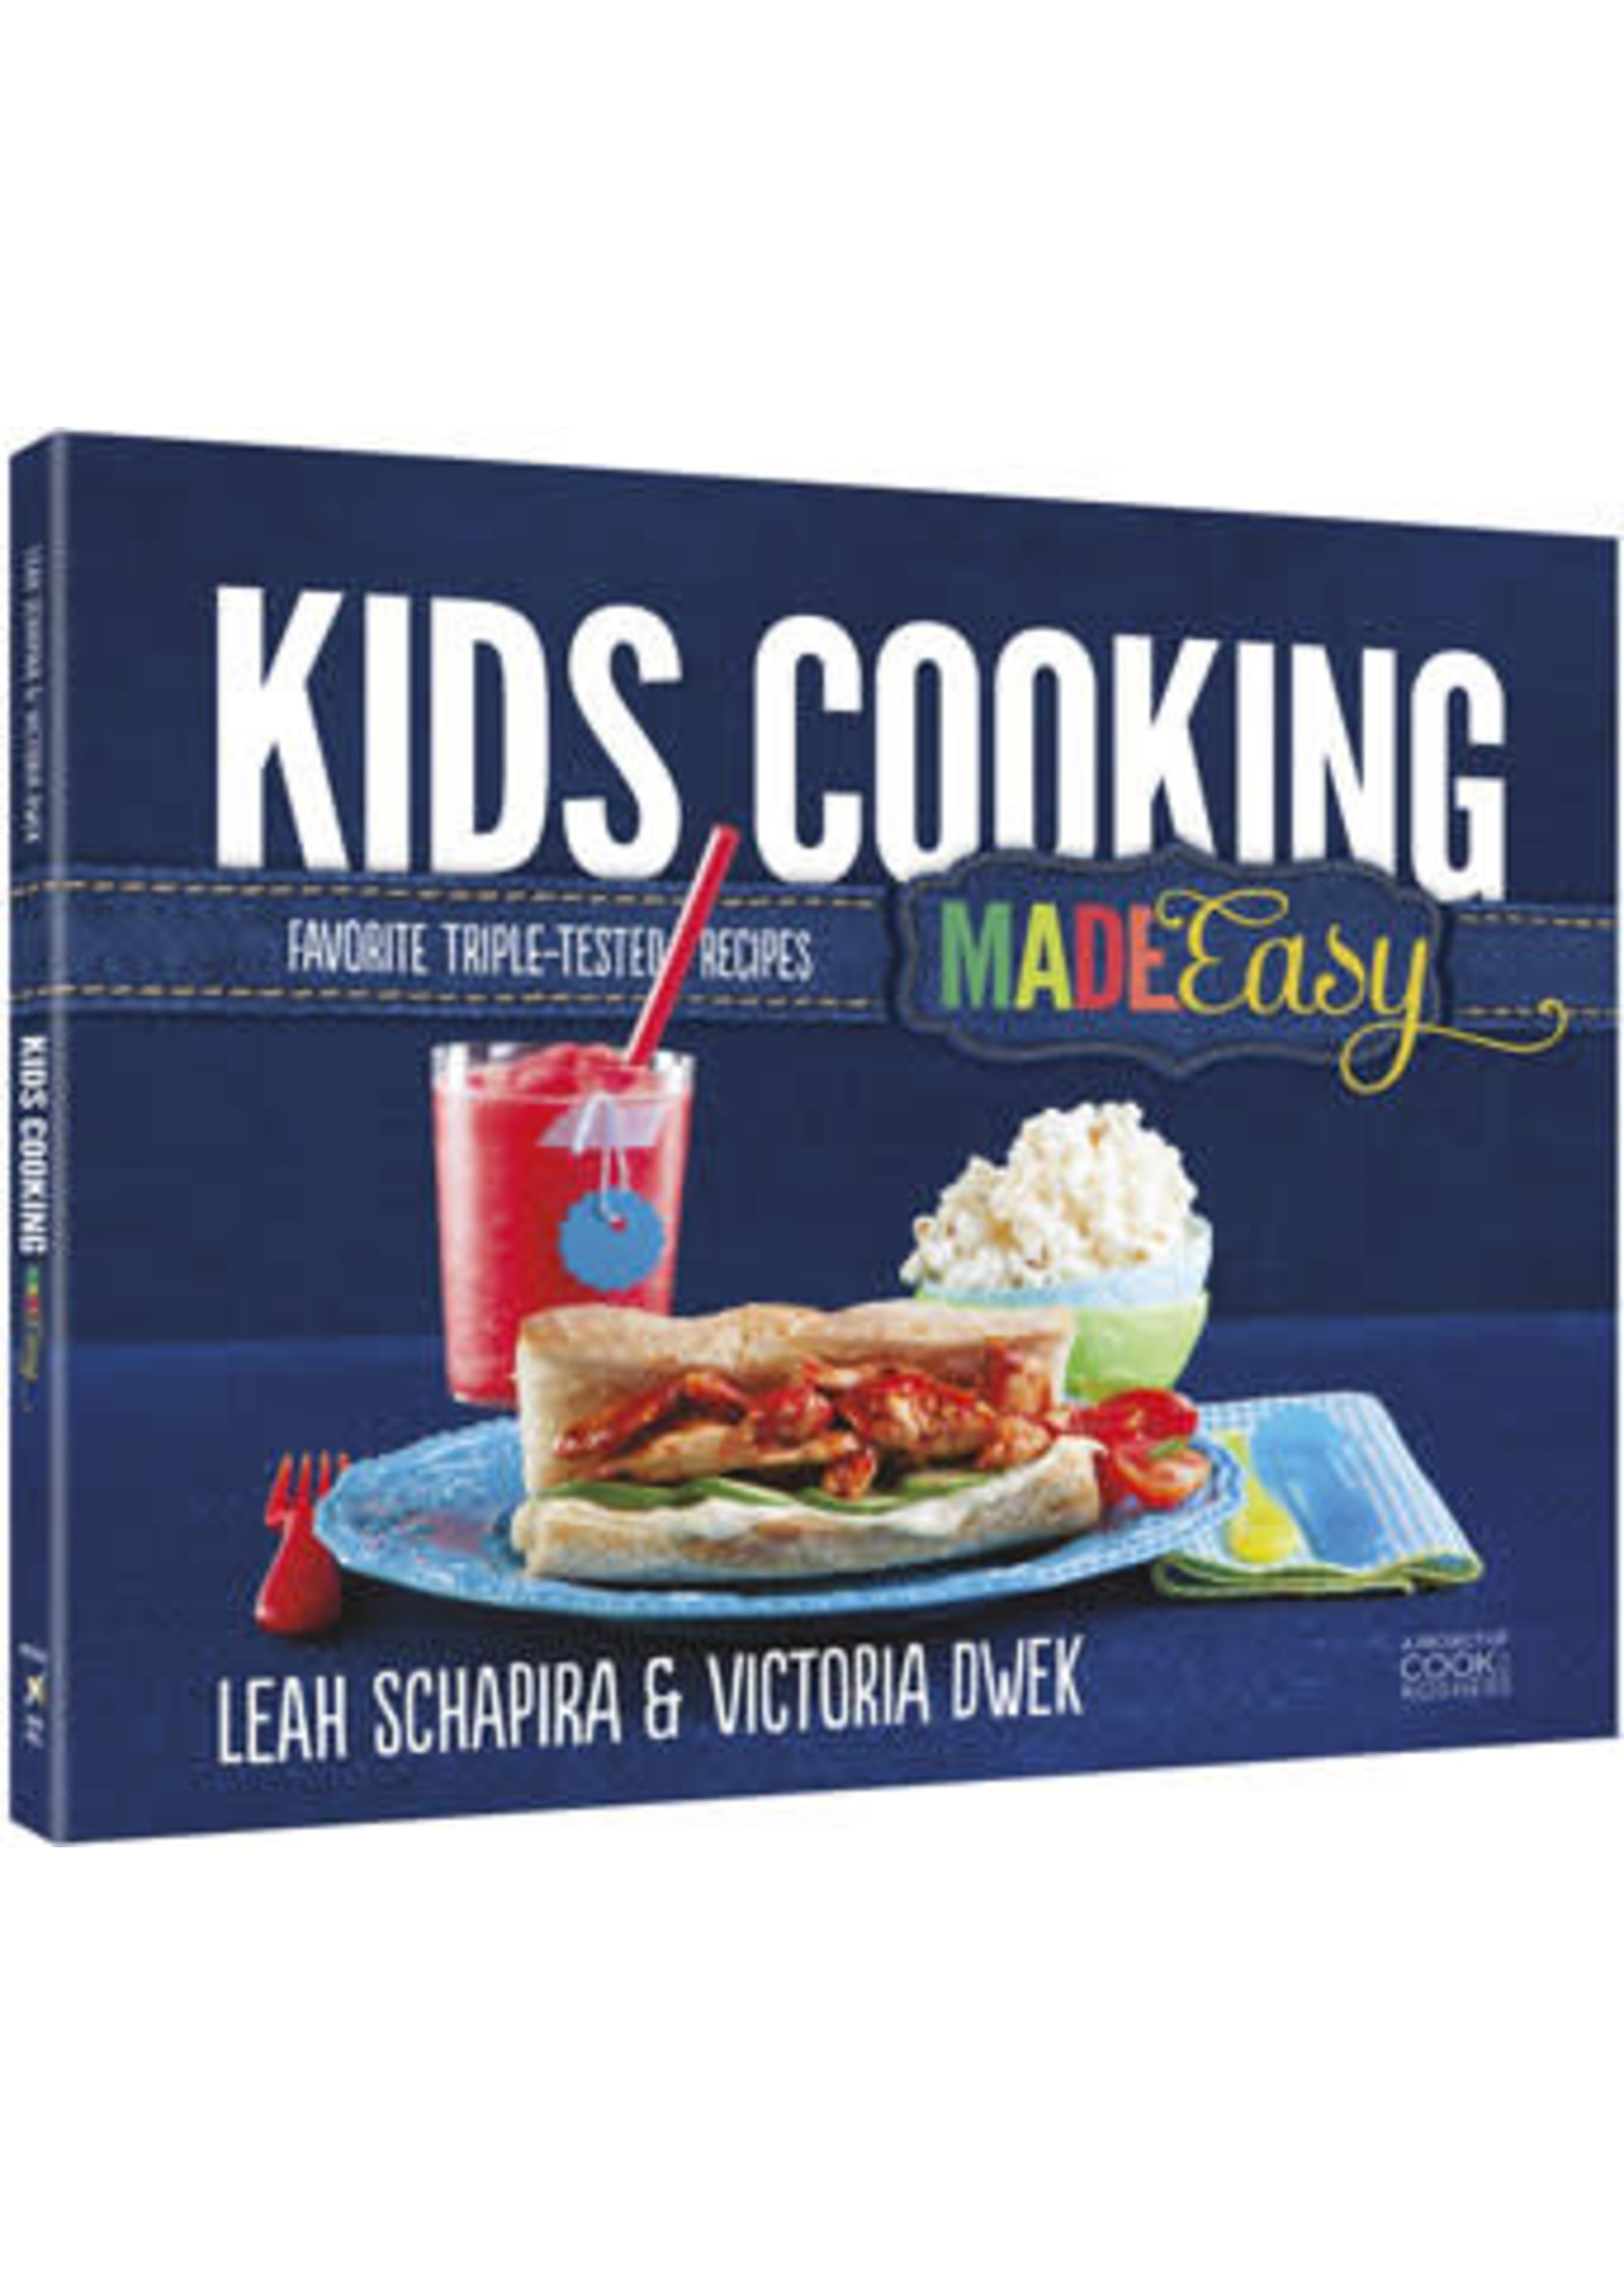 KIDS COOKING MADE EASY